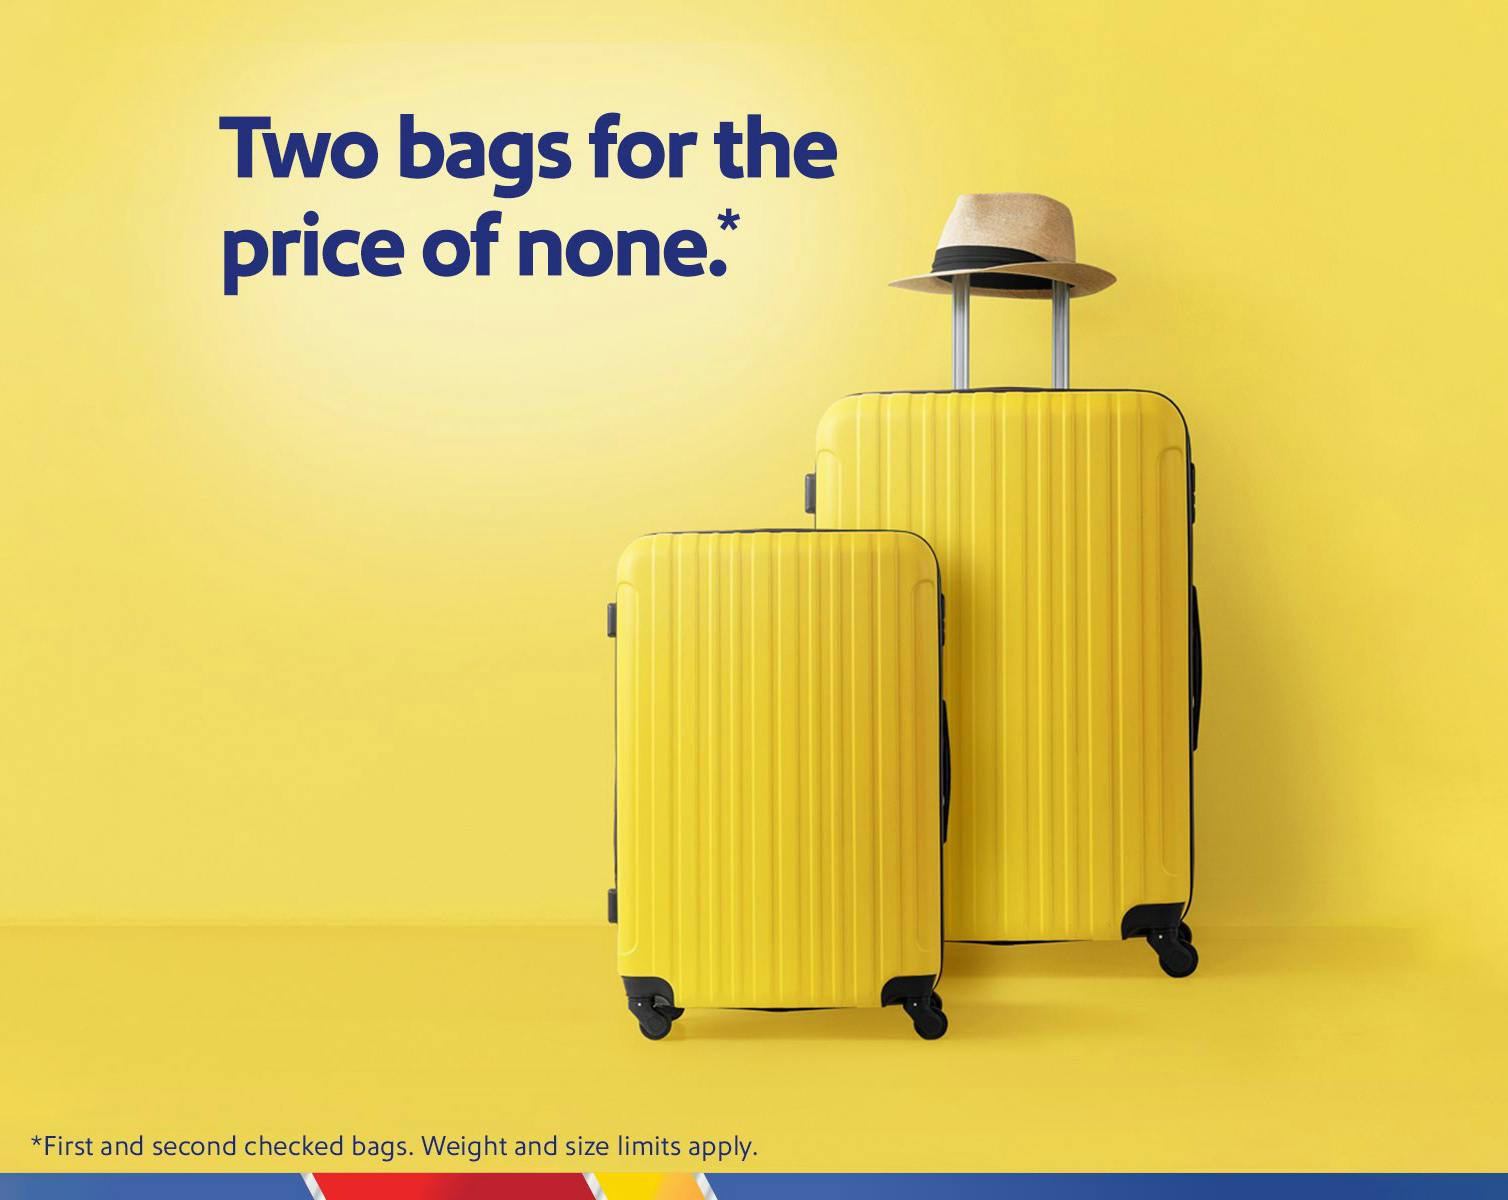 Bags fly free policy could cost Southwest Airlines in unexpected way